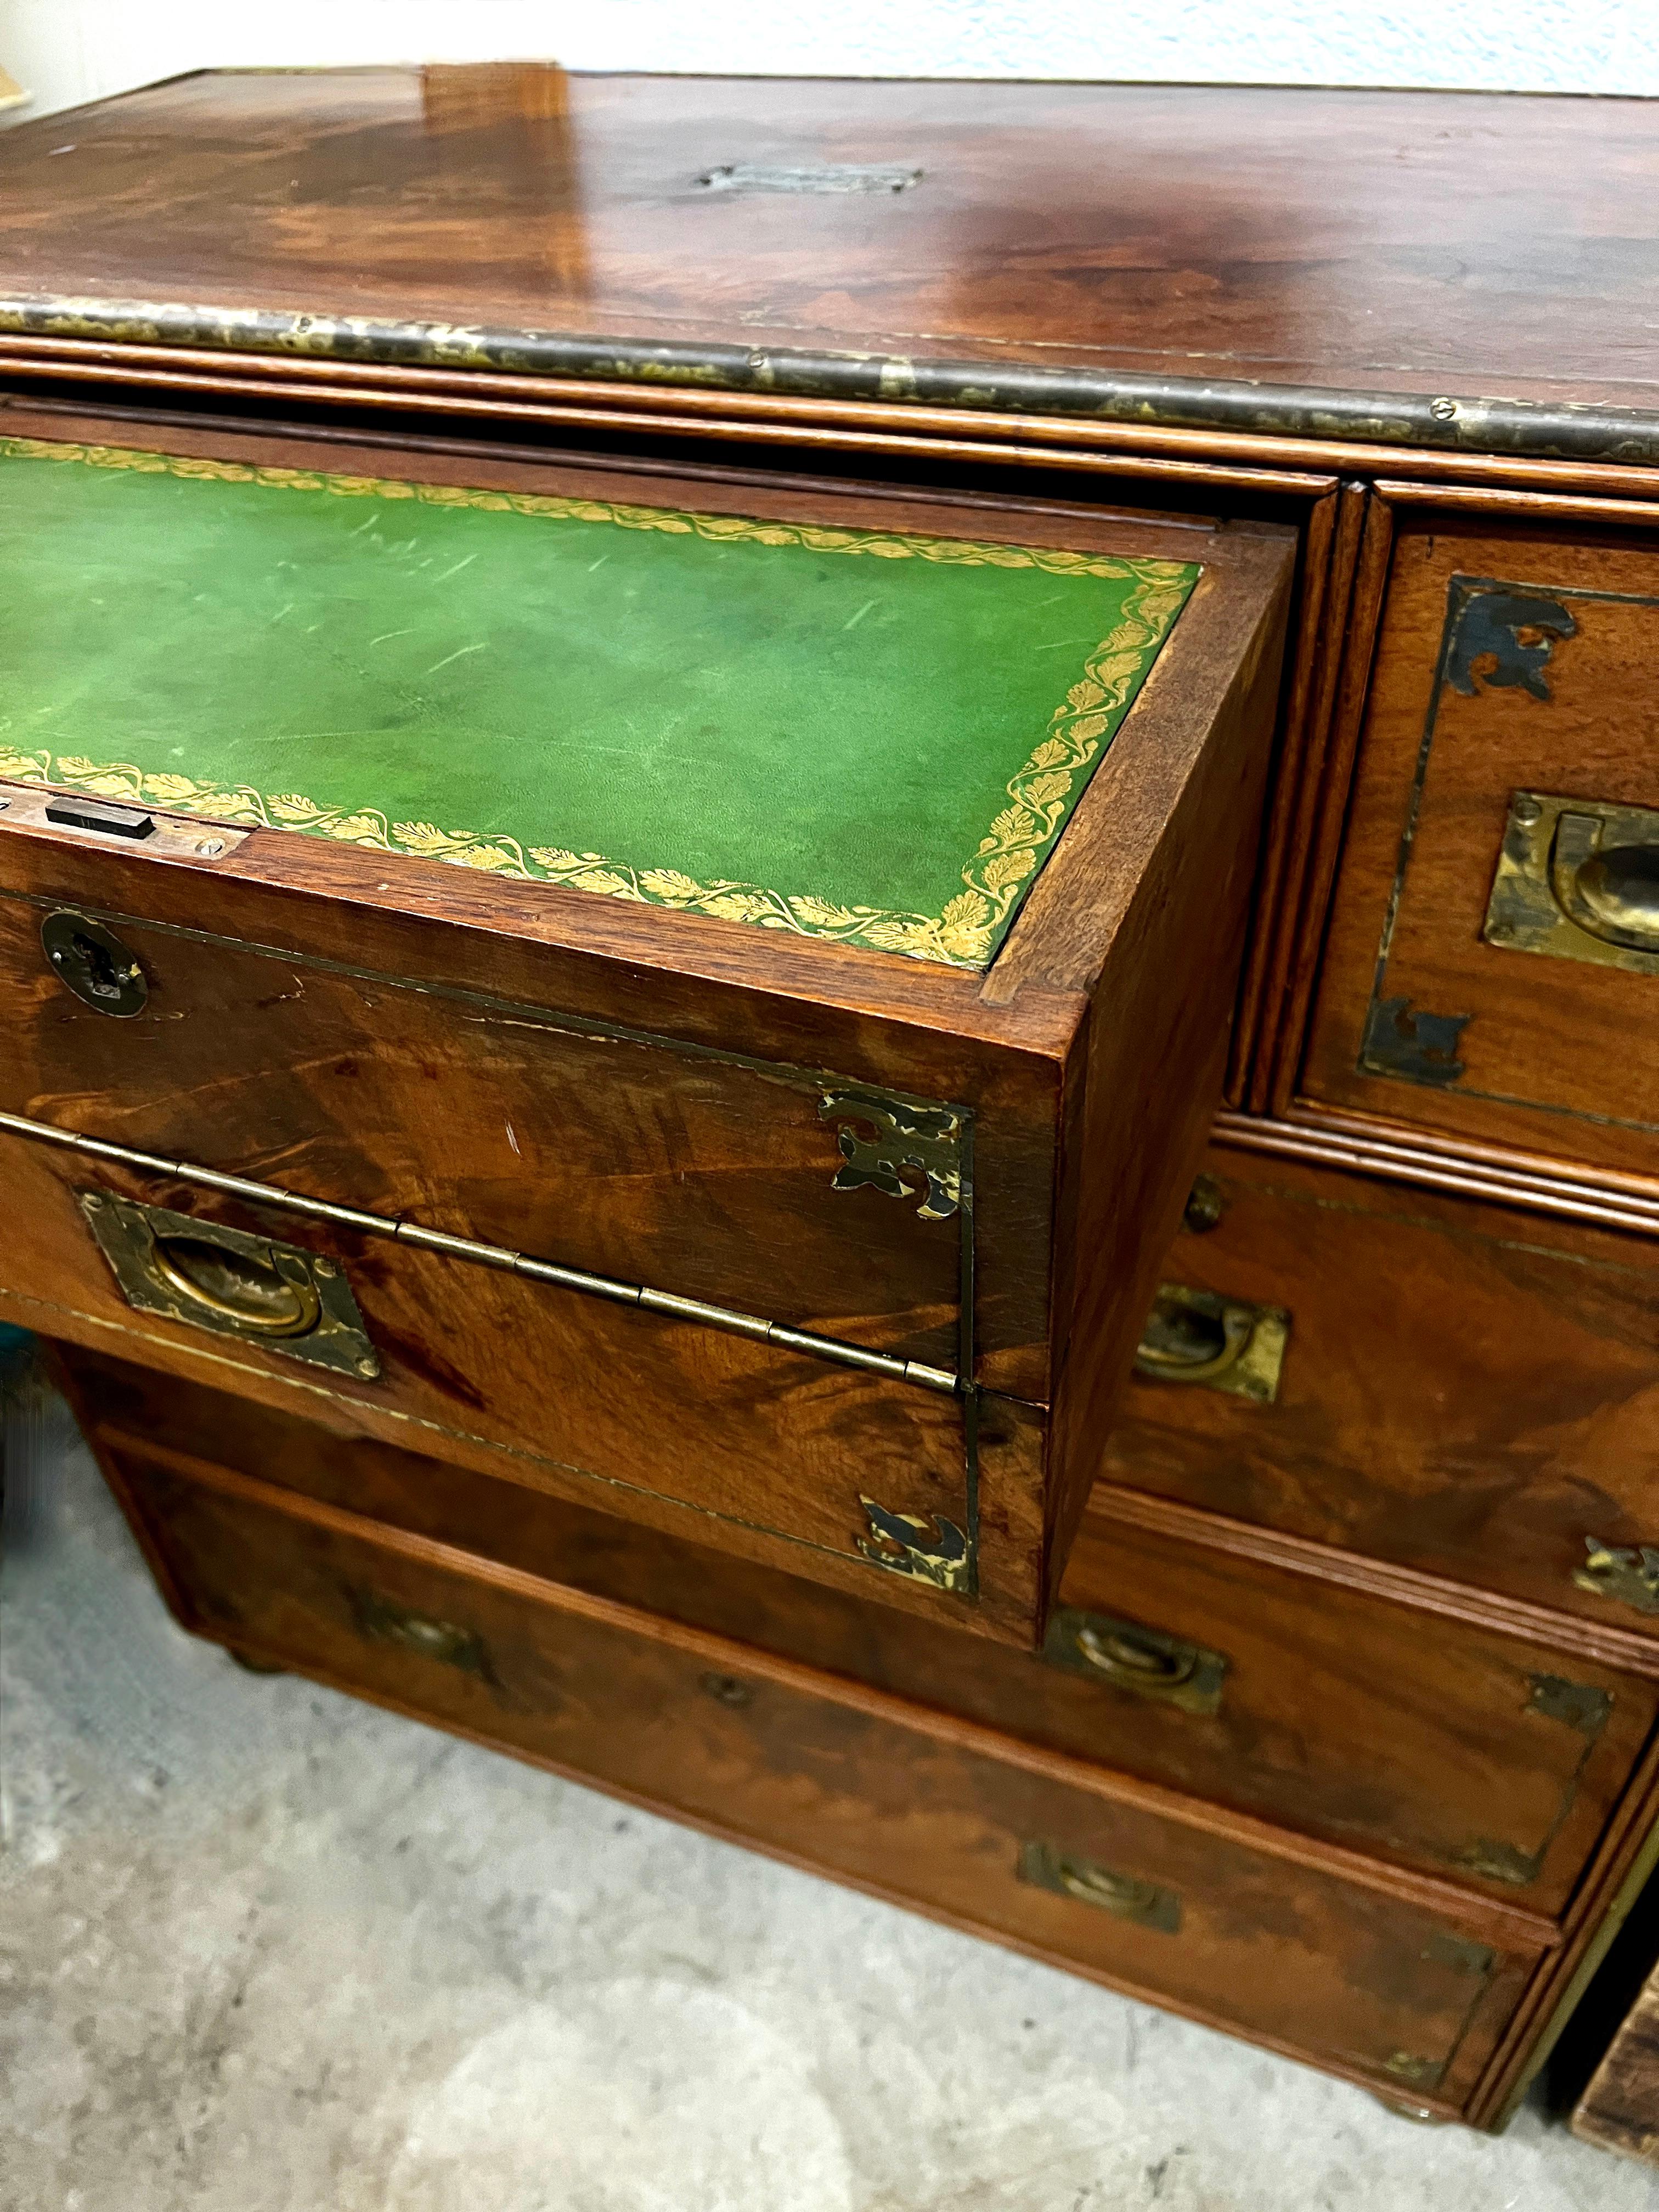 Anglo Raj Regency Campaign Chest with Desk Trimmed in Brass Banding Accents 1811 For Sale 9